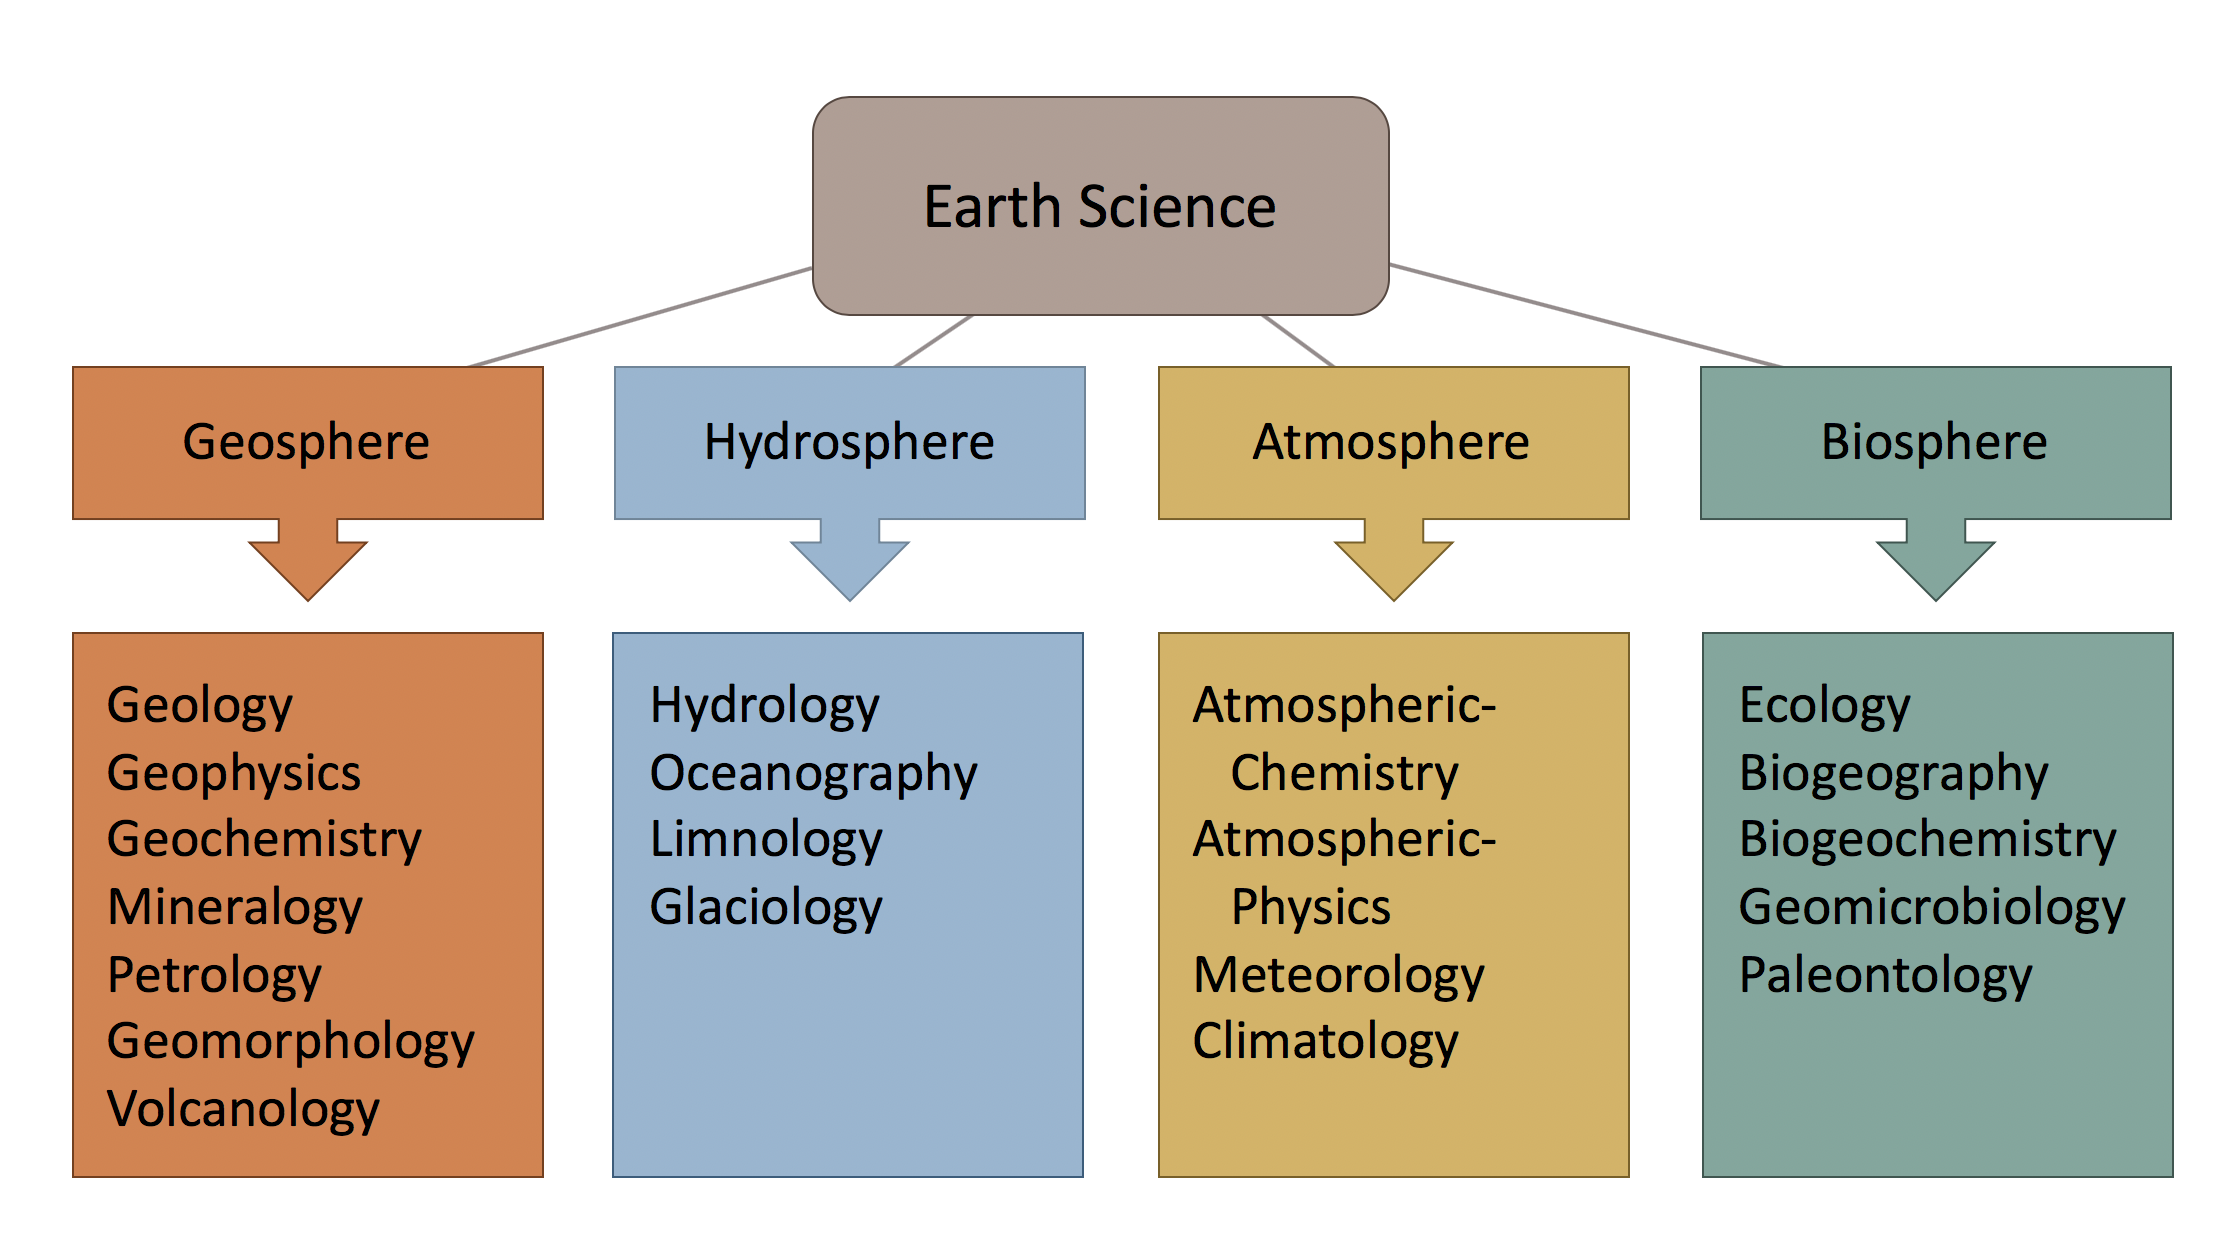 Earth science details